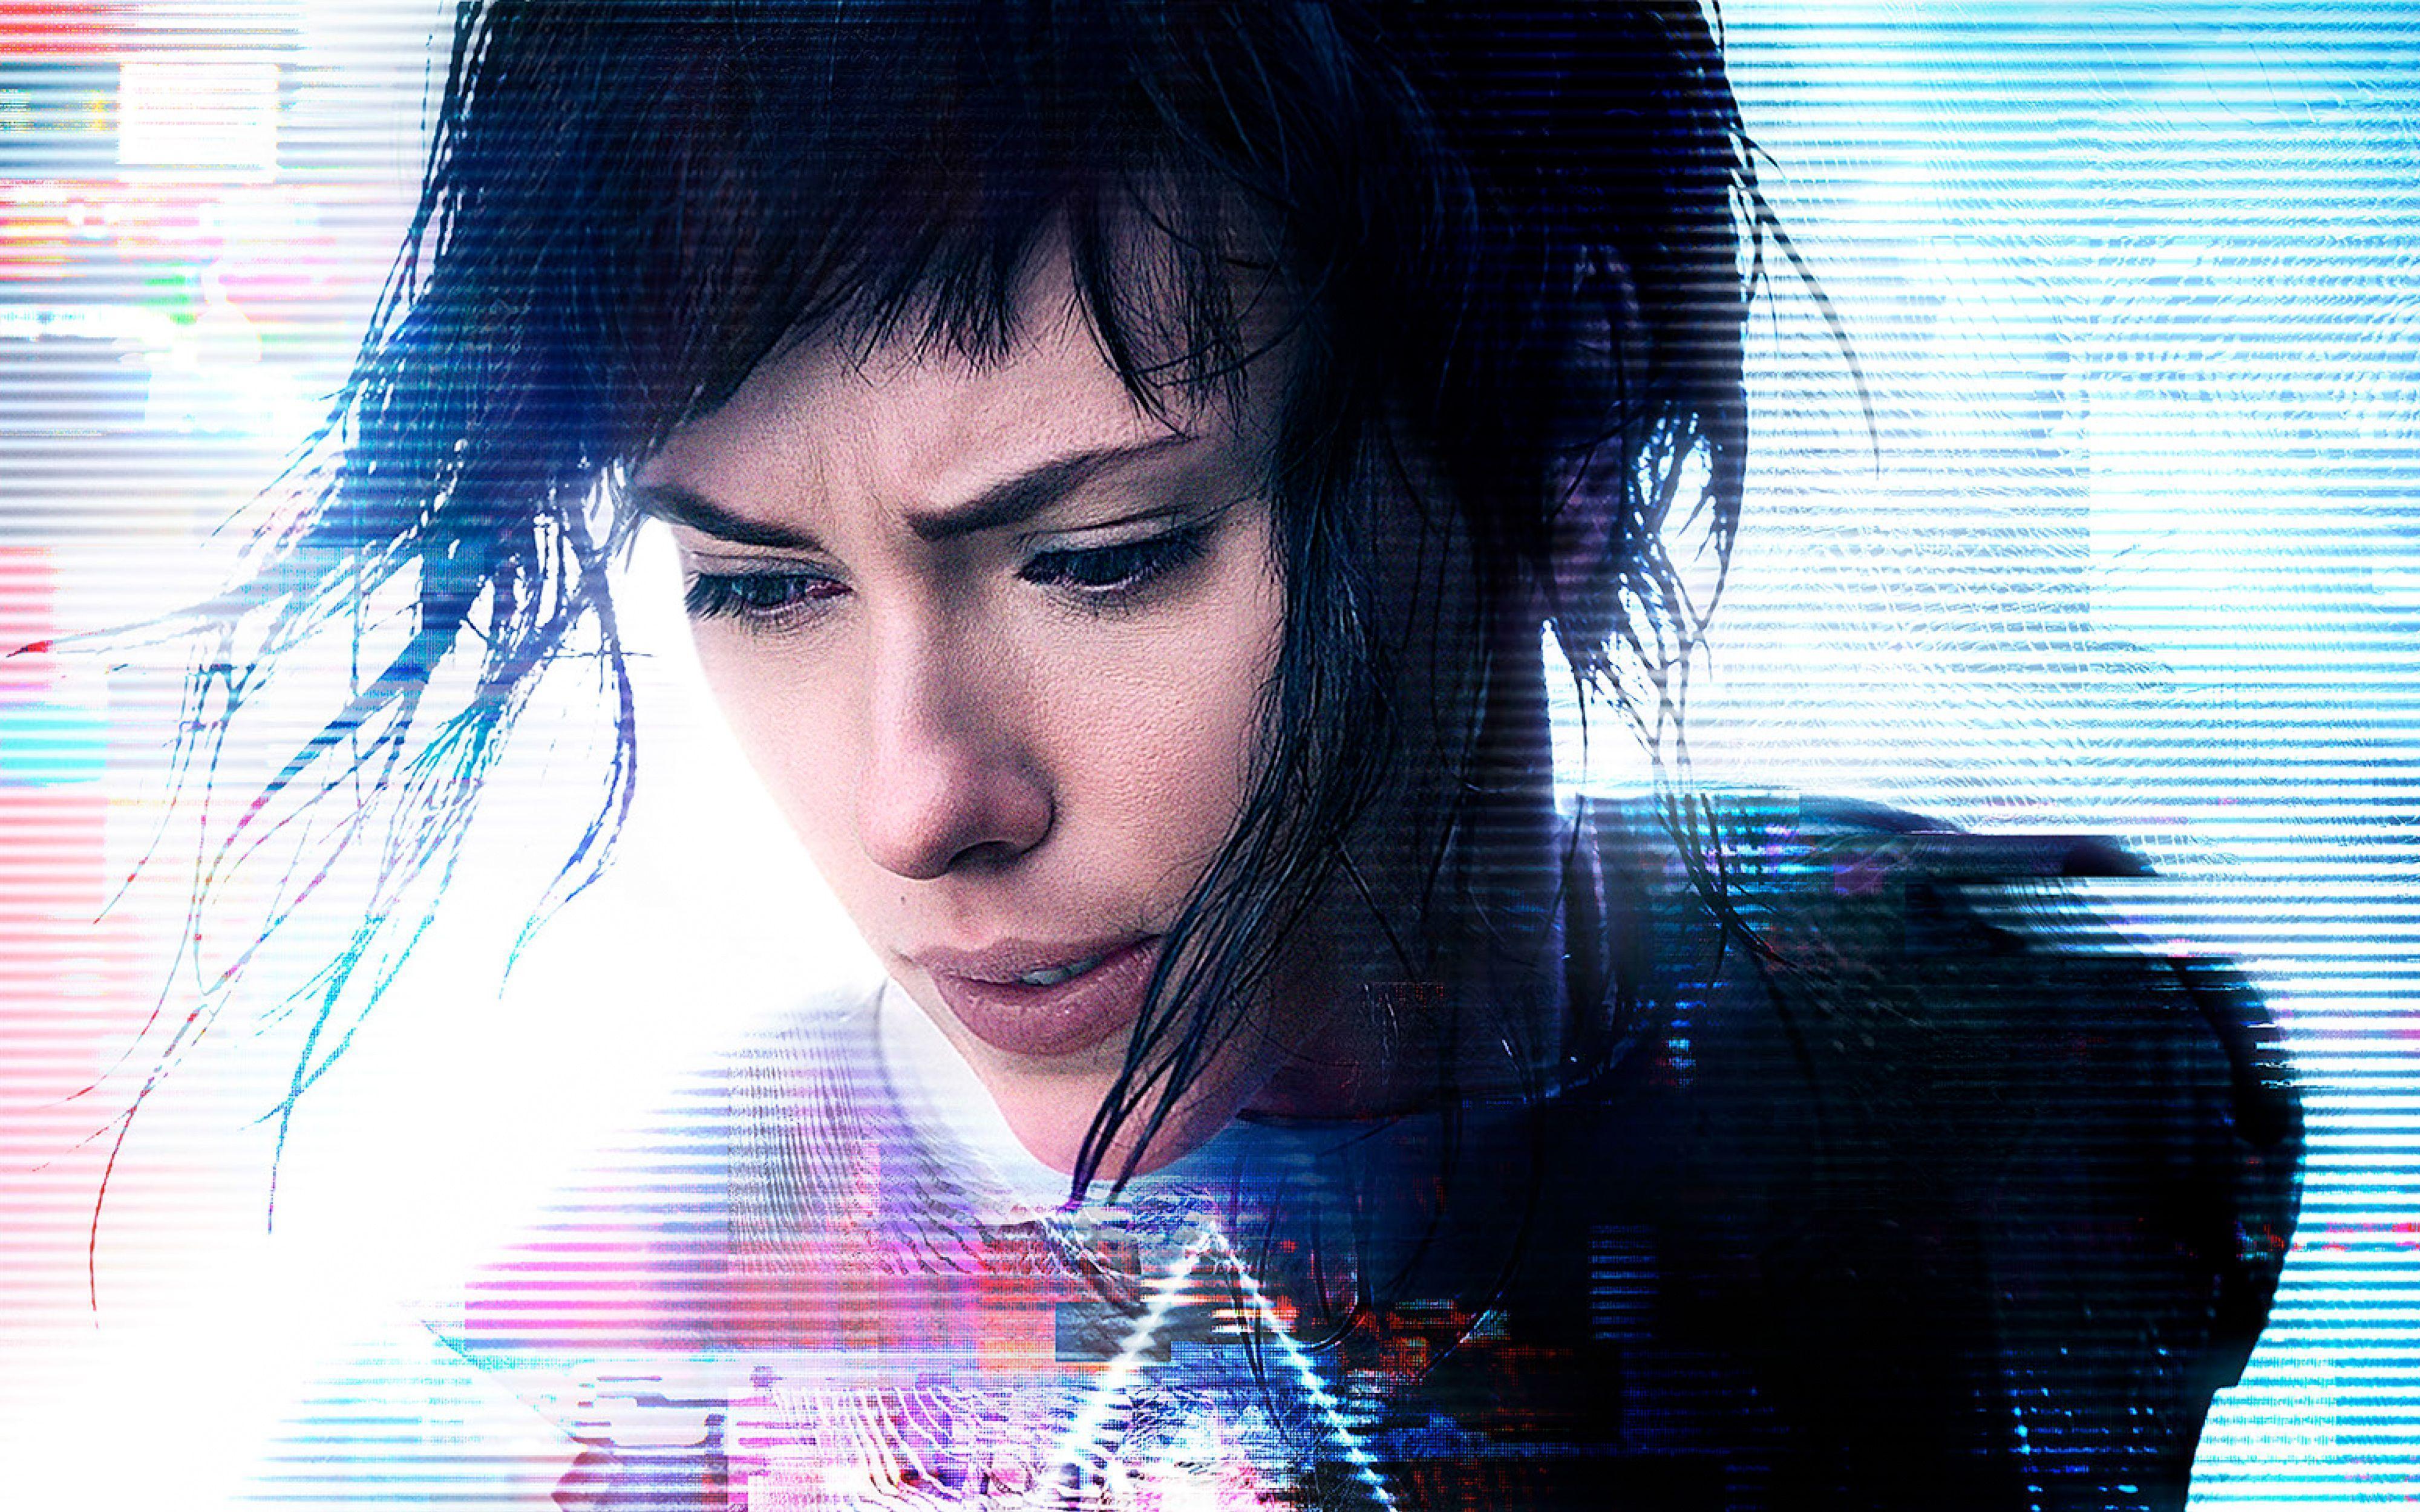 Ghost In The Shell (2017) HD Wallpaper. Background